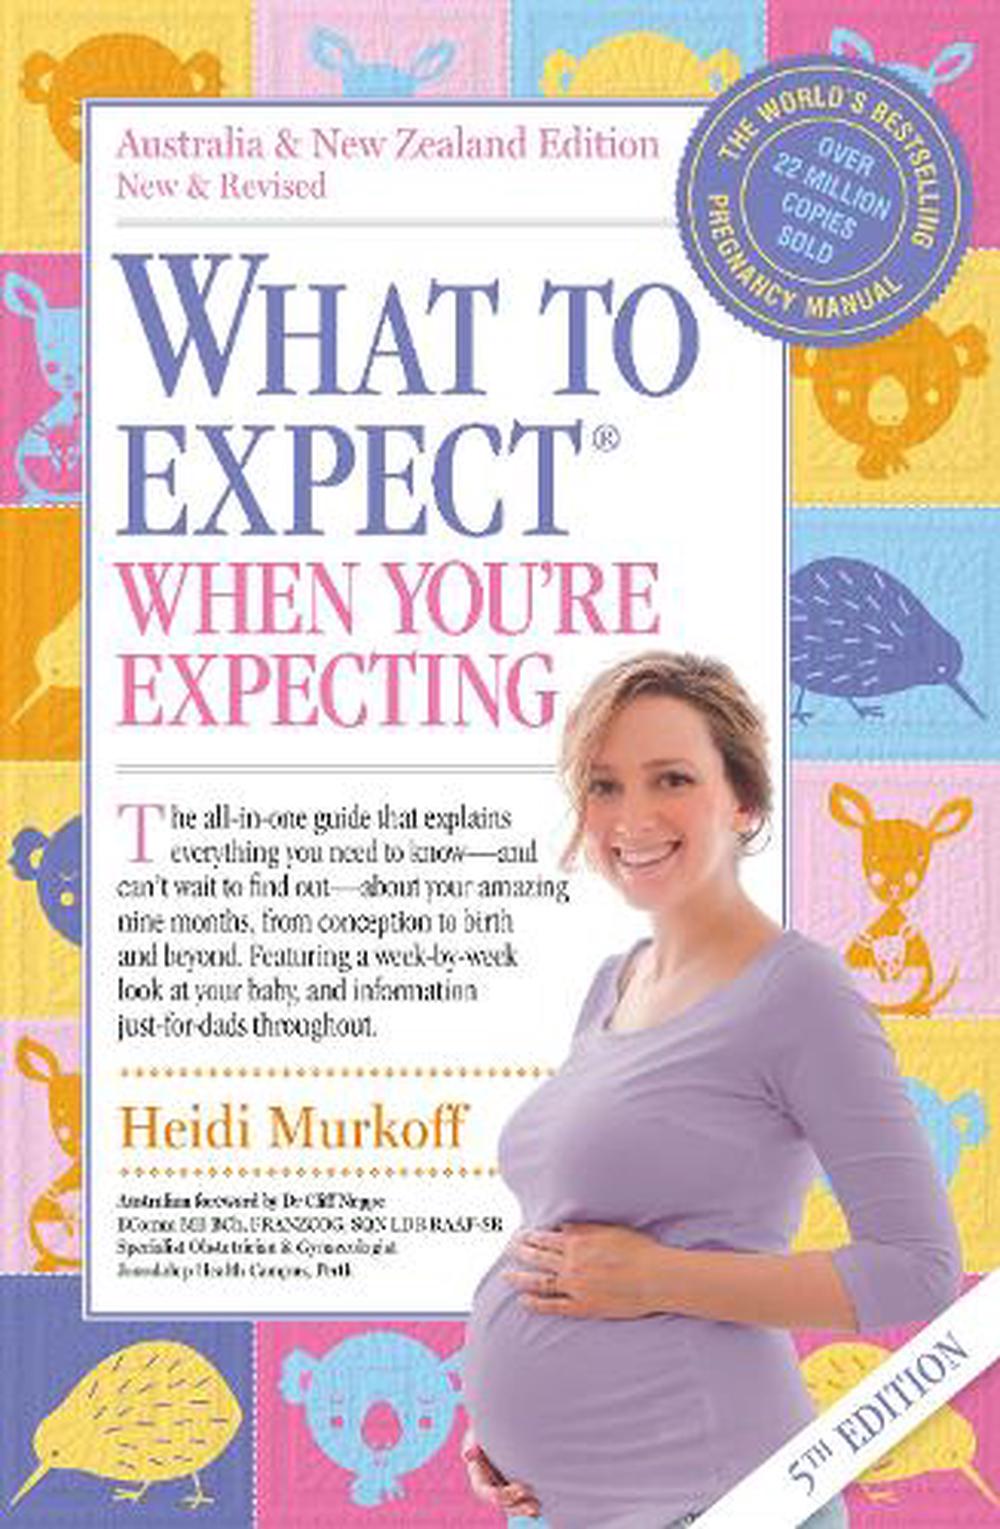 What to Expect When You're Expecting by Heidi E. Murkoff, Paperback